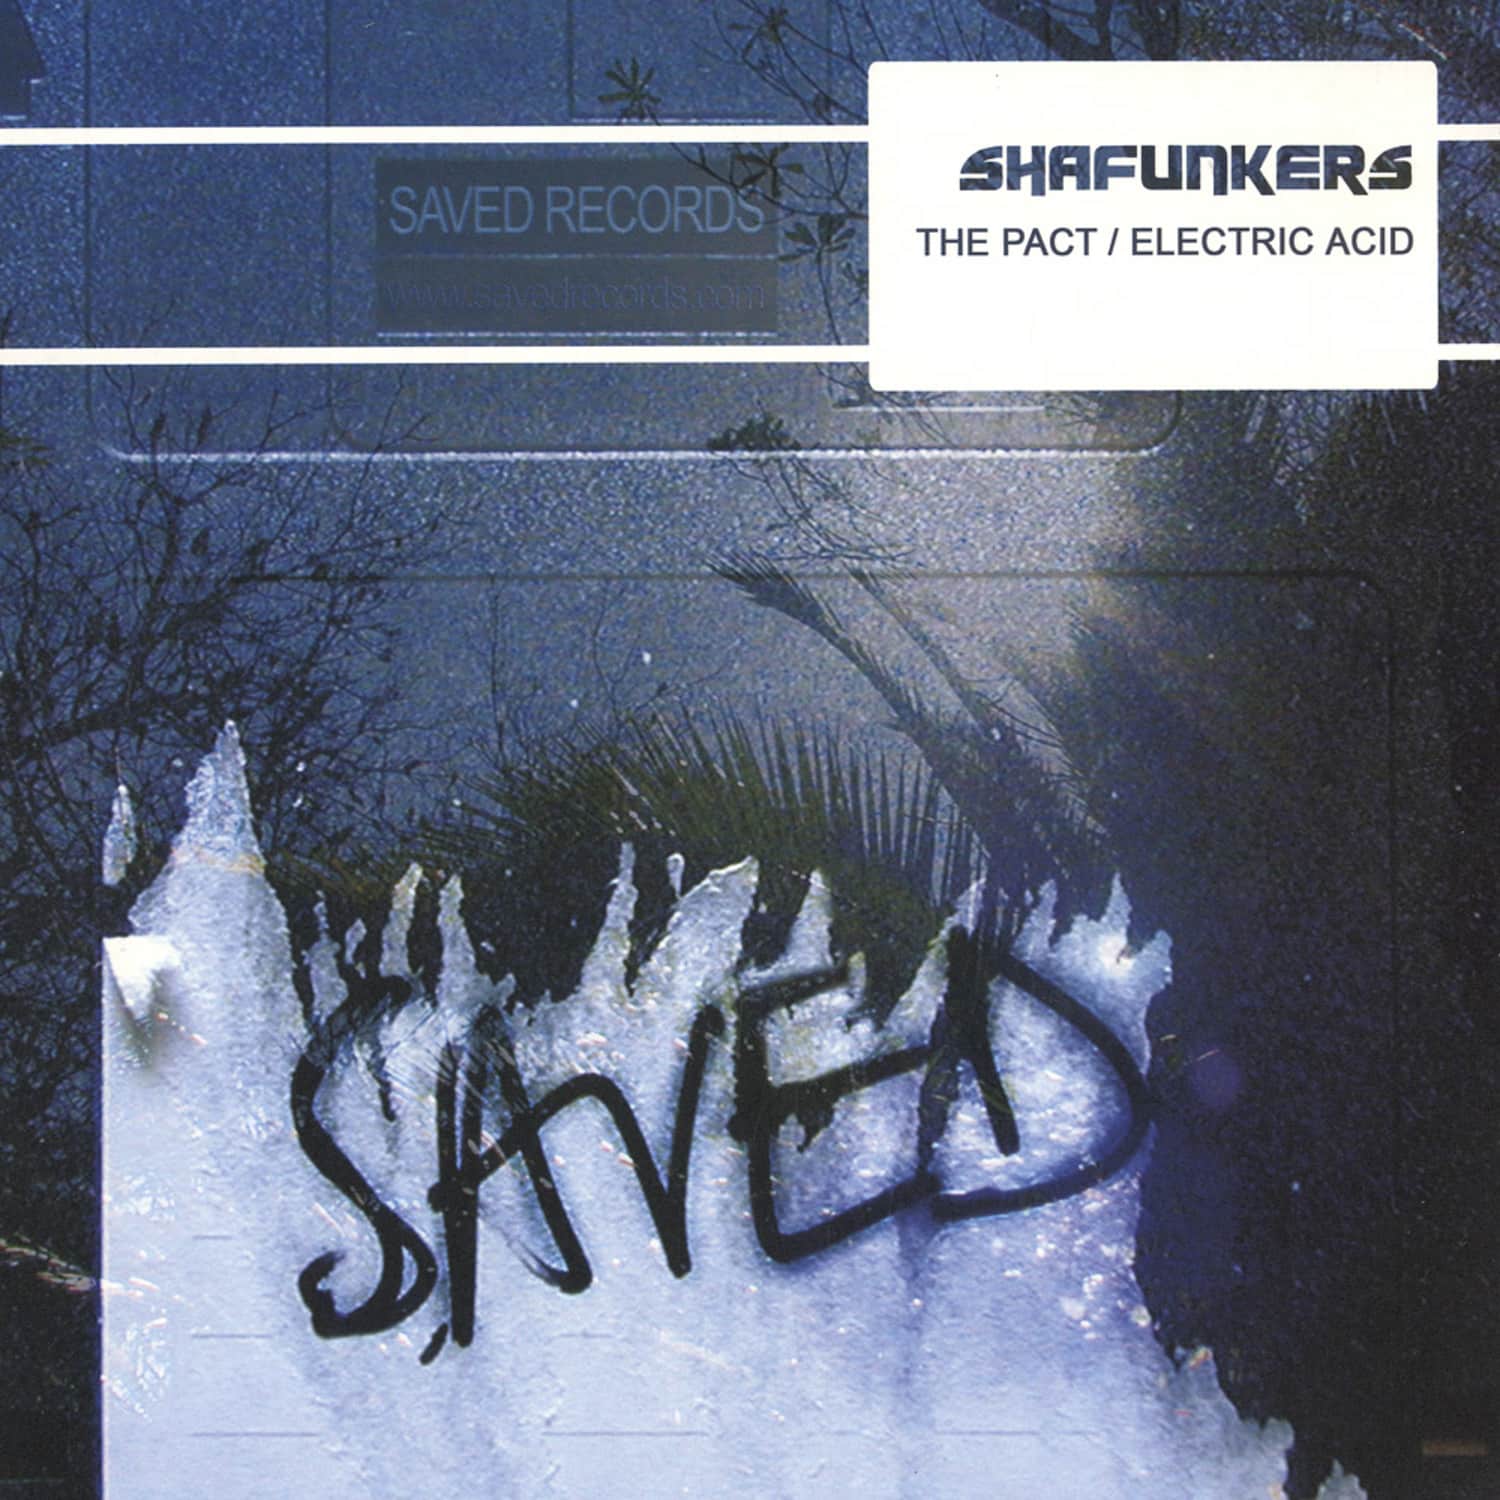 Shafunkers - THE PACT / ELECTRIC ACID